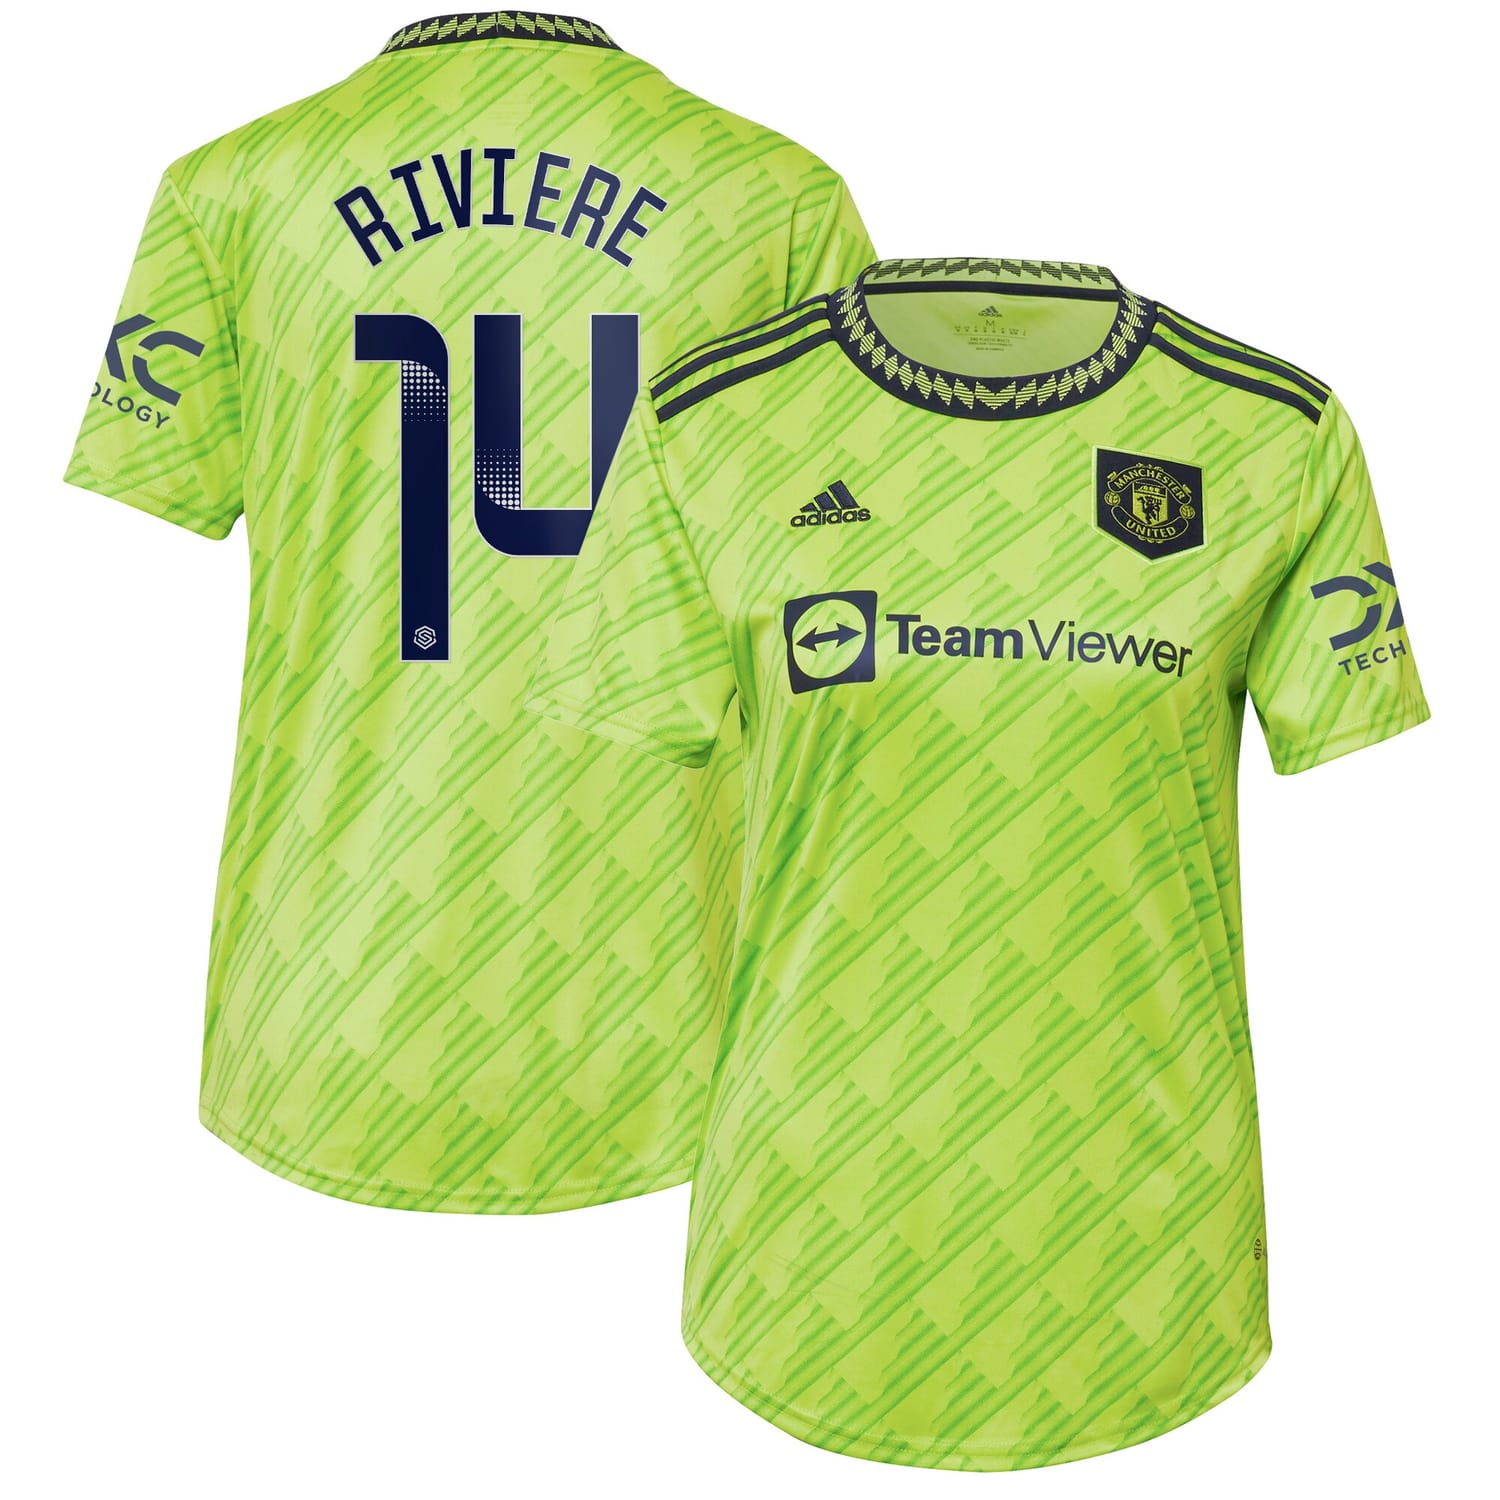 Premier League Manchester United Third WSL Jersey Shirt 2022-23 player Jayde Riviere 14 printing for Women